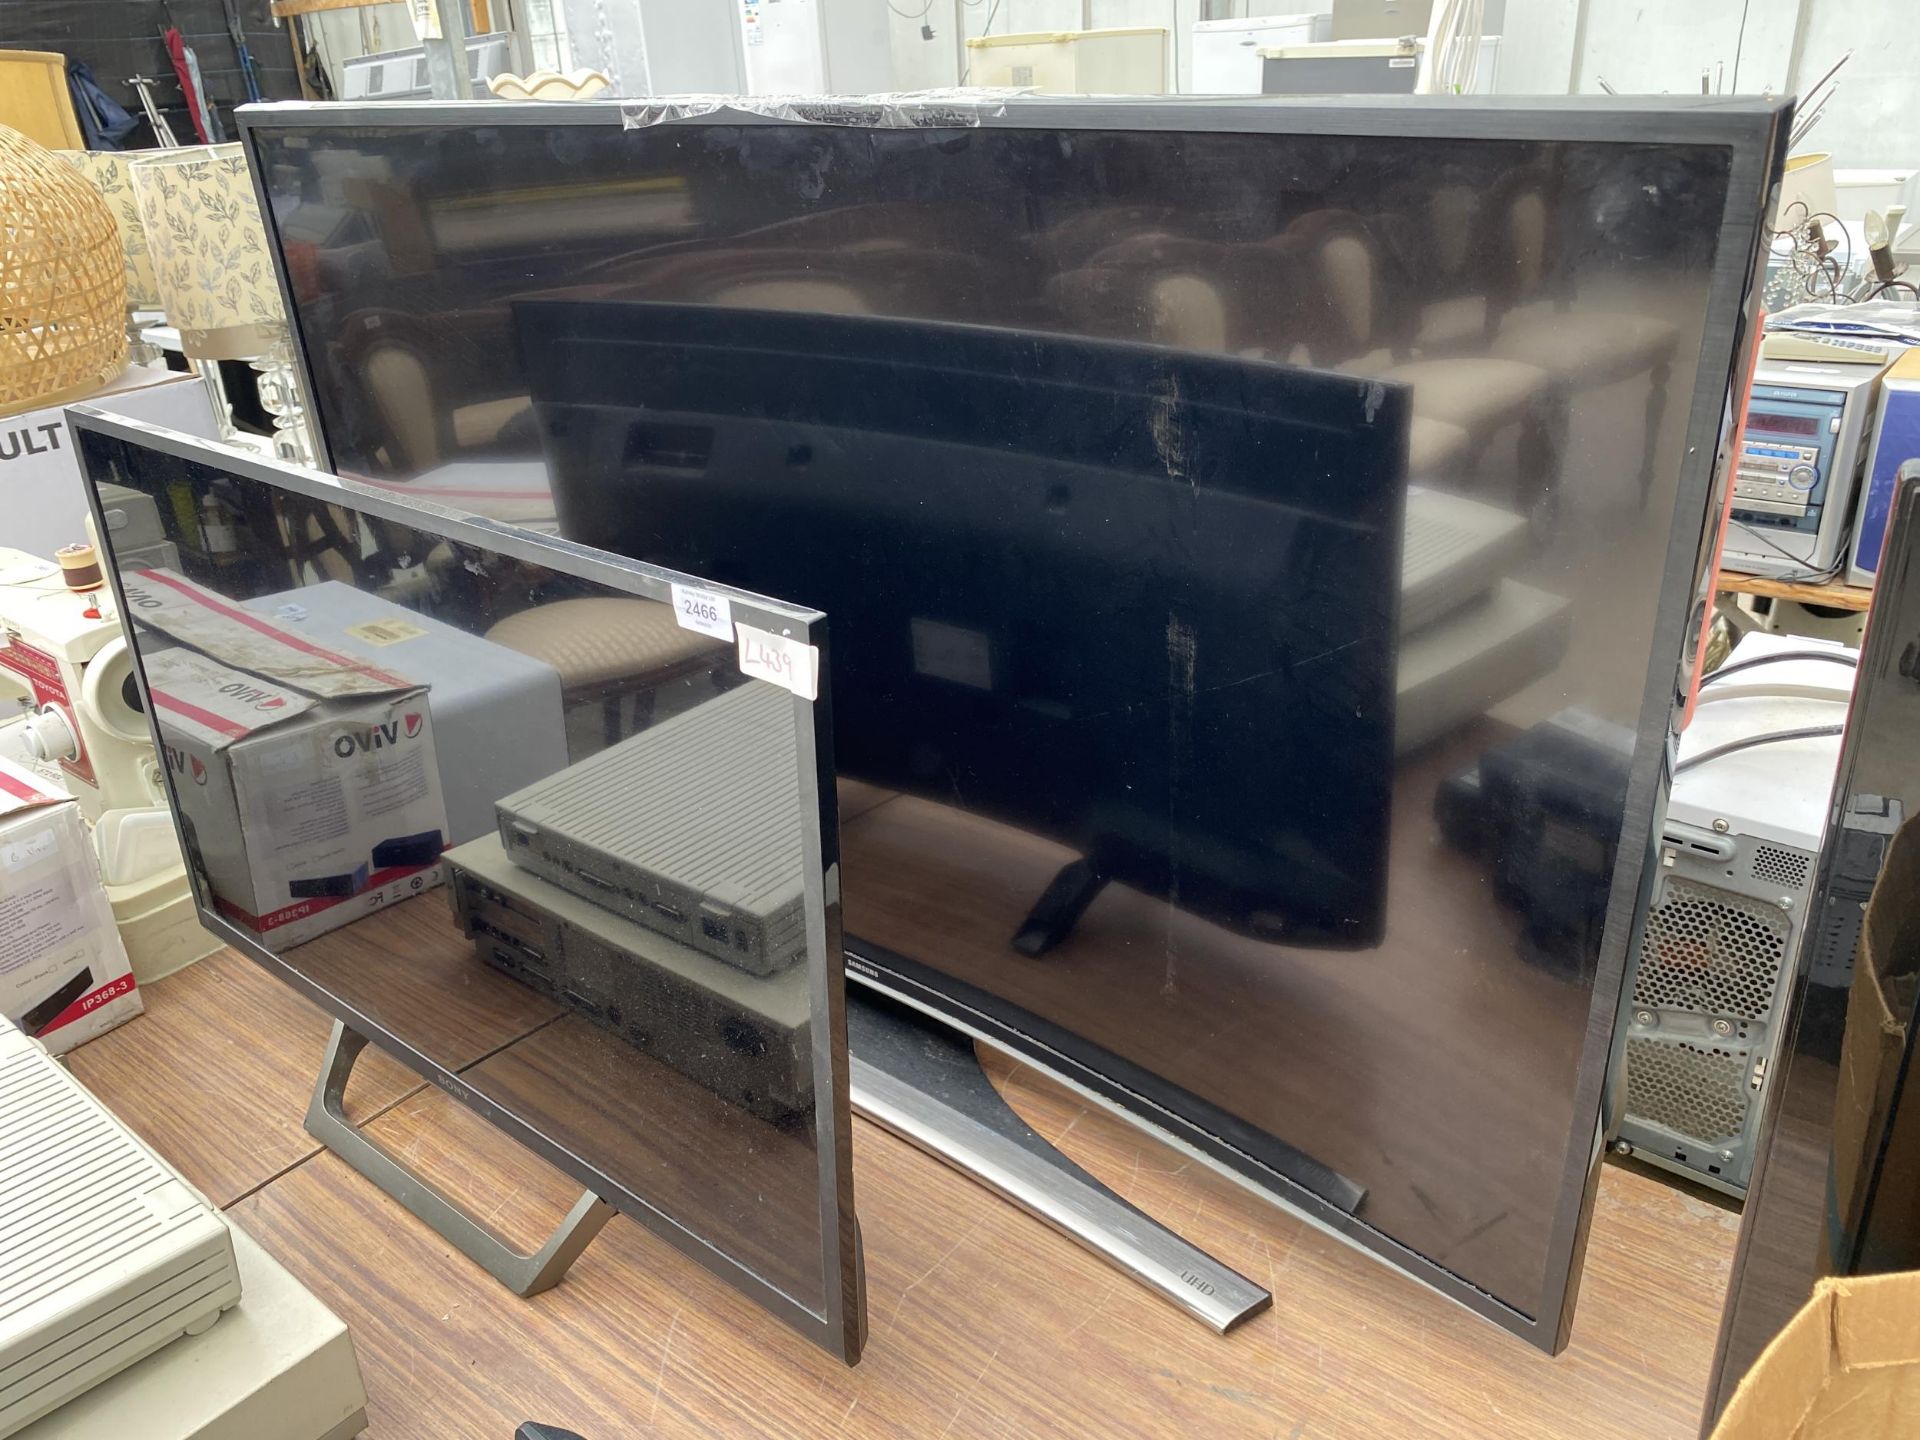 A SONY FLATSCREEN TELEVSION TOGETHER WITH LARGER CURVED SAMSUNG TELEVISION